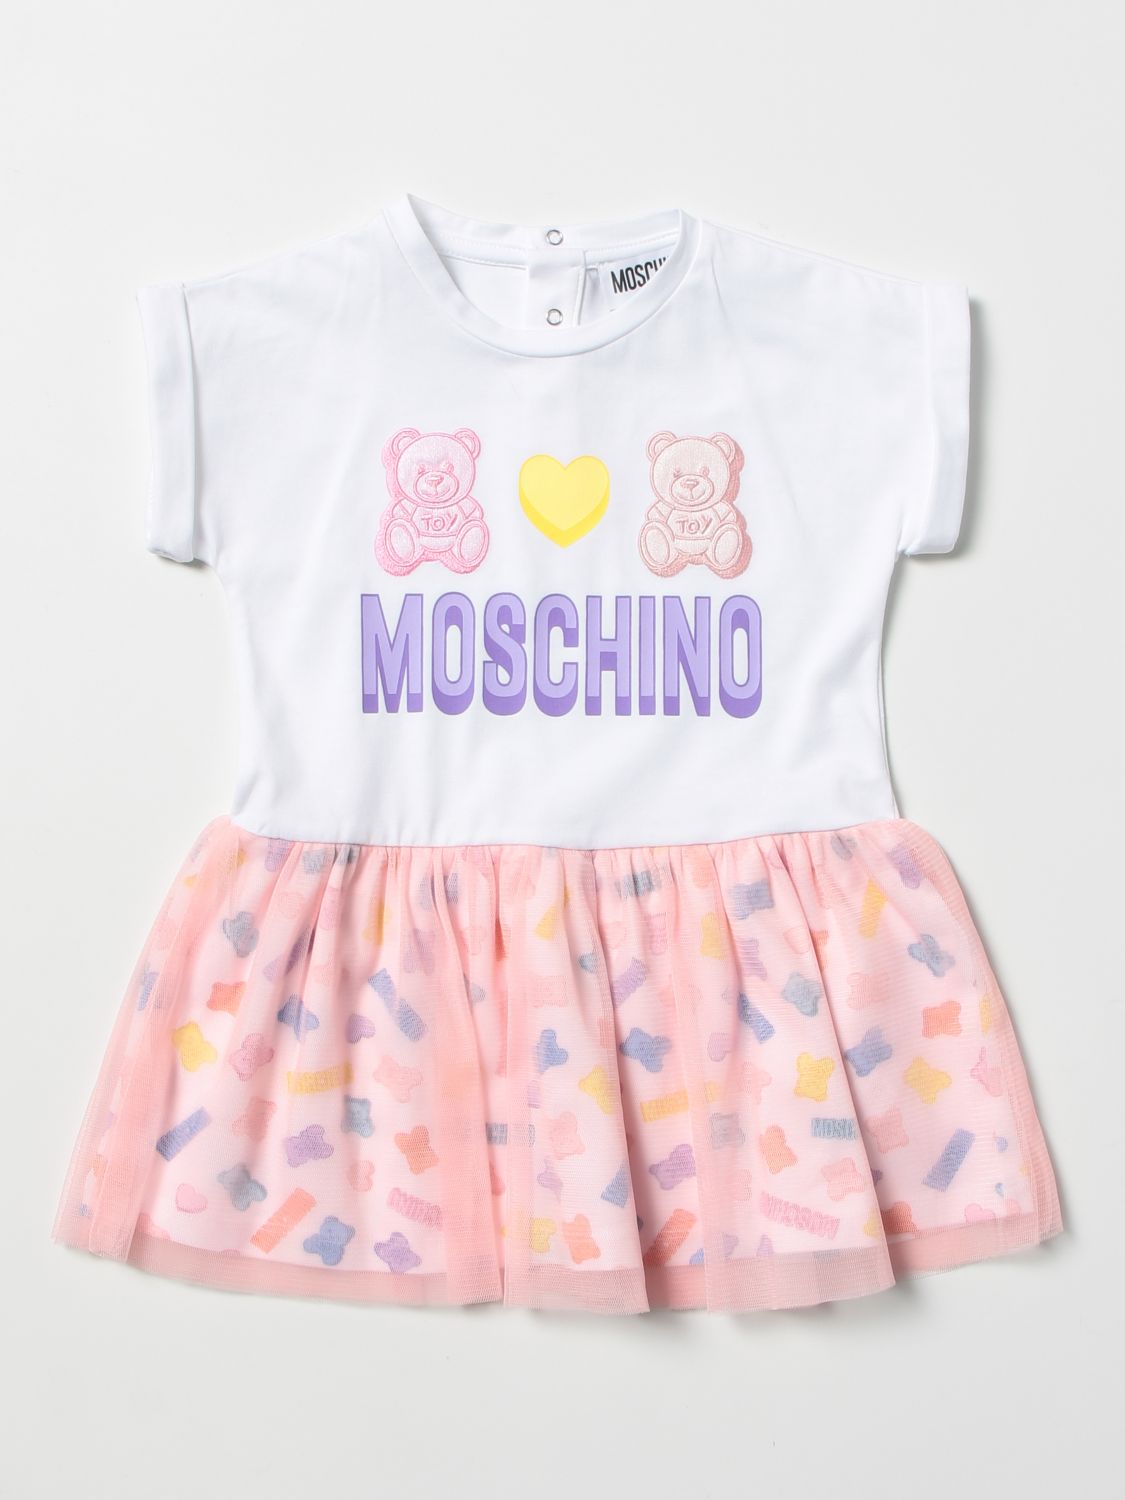 Moschino Baby Outlet: dress - White | Moschino Baby romper MDV09LLBB92 ...